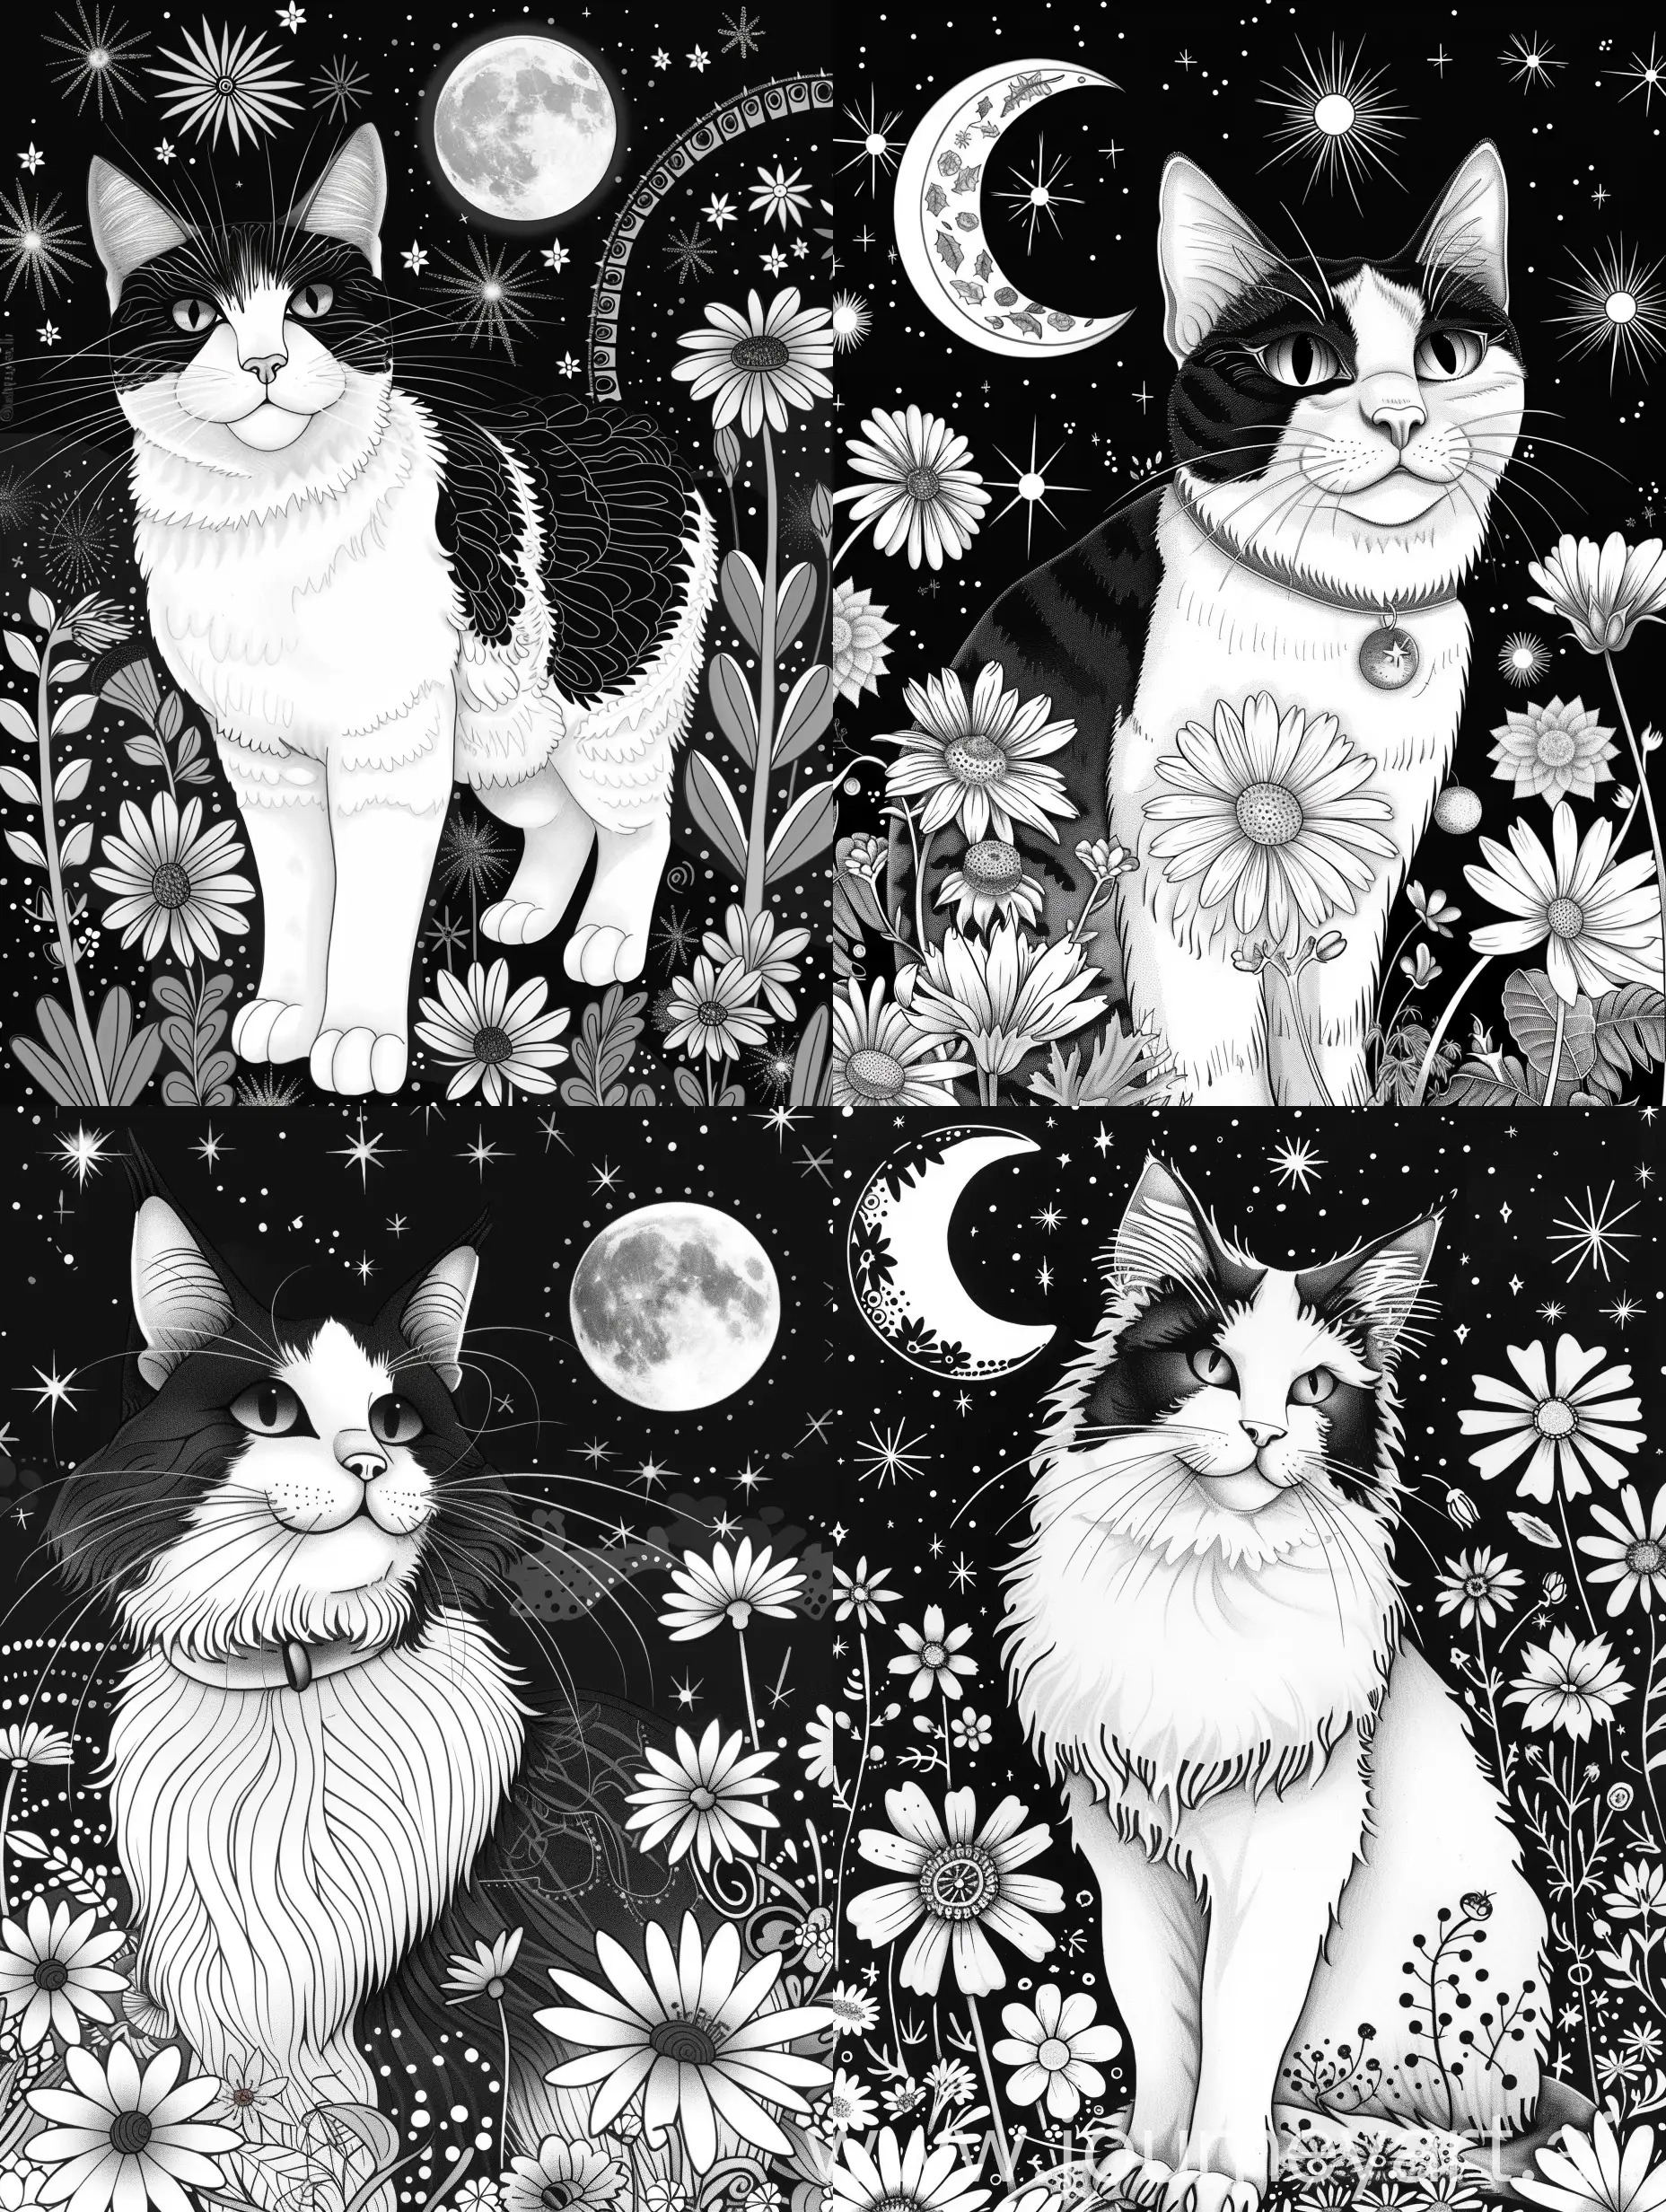 Mysterious-Black-and-White-Cat-Gazing-at-Bright-Night-Moon-Amongst-Floral-Serenity